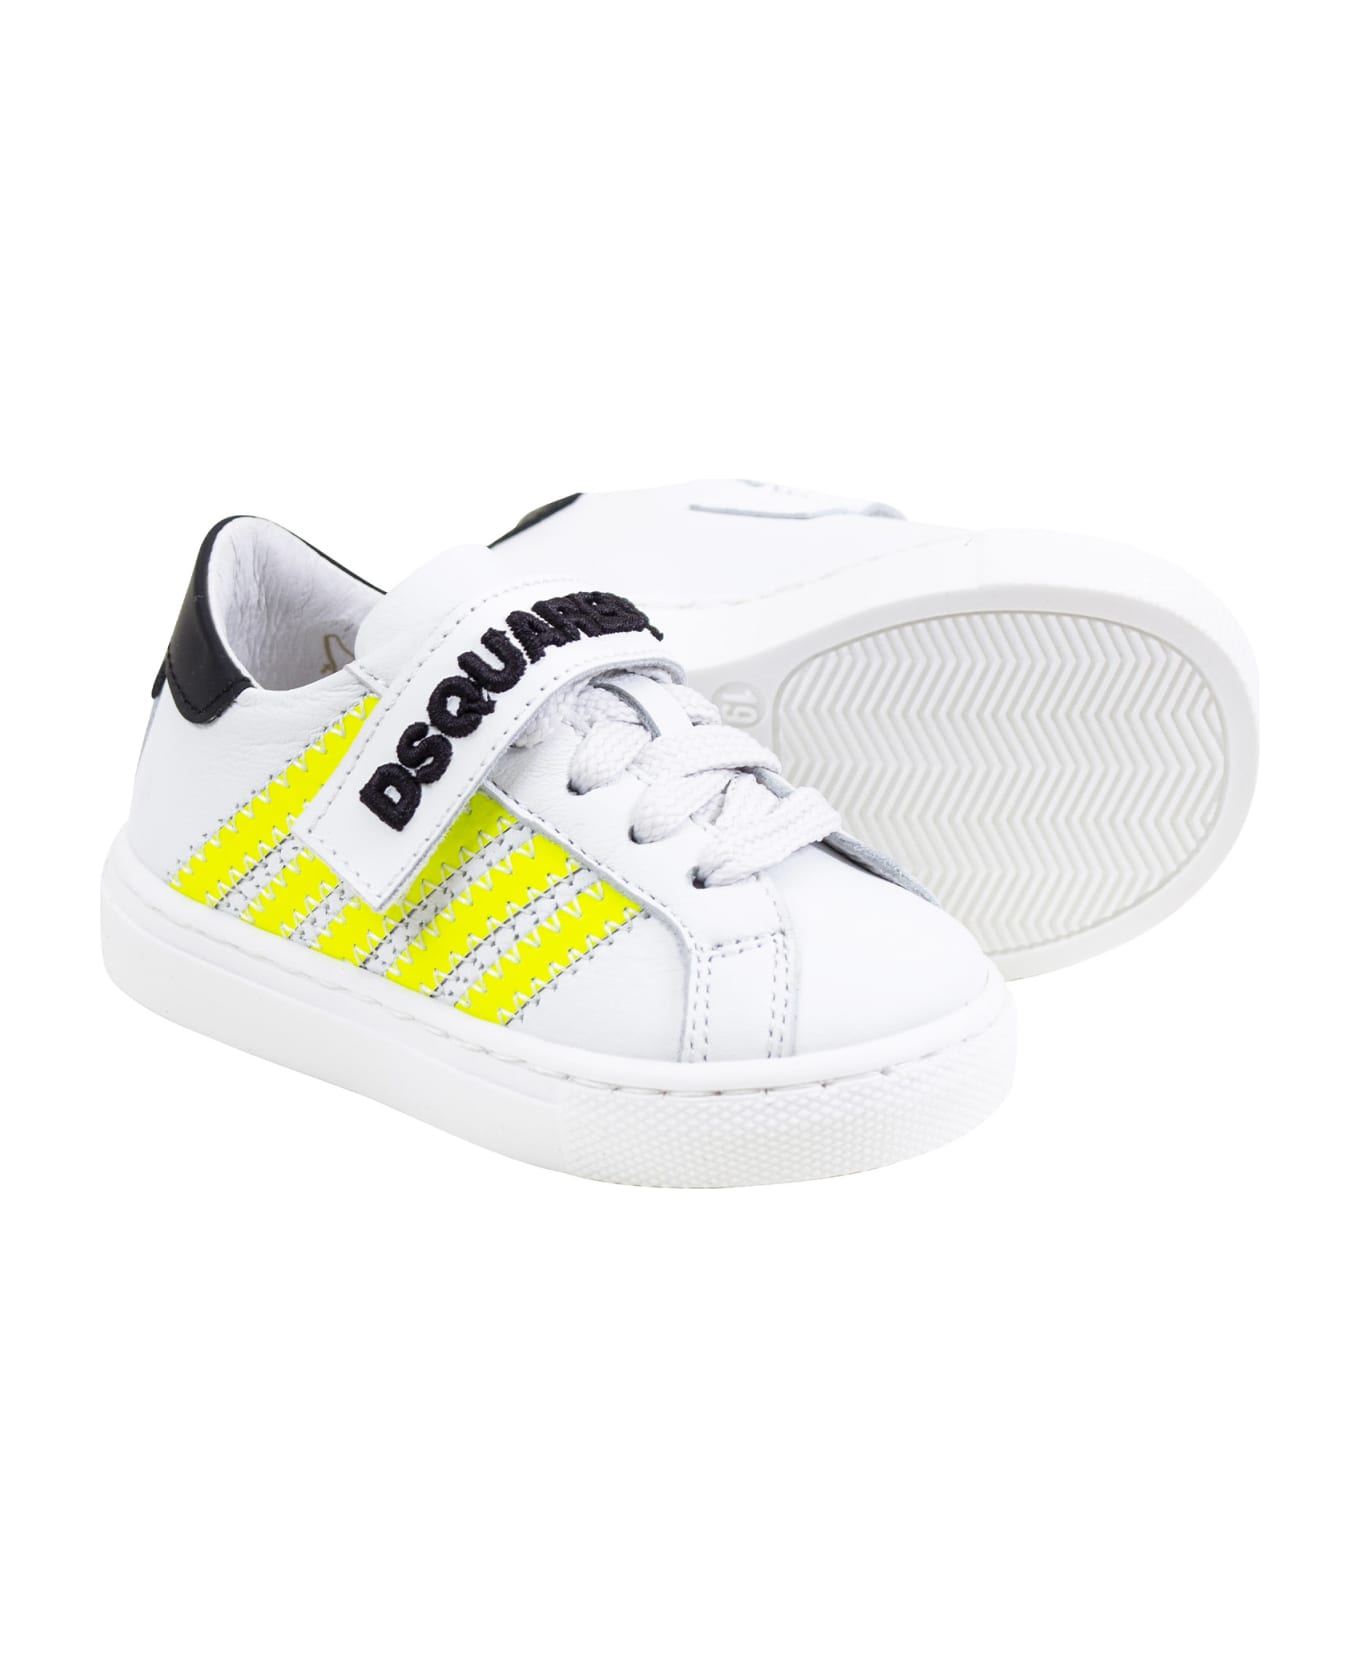 Dsquared2 Child Sneakers - Variante unica